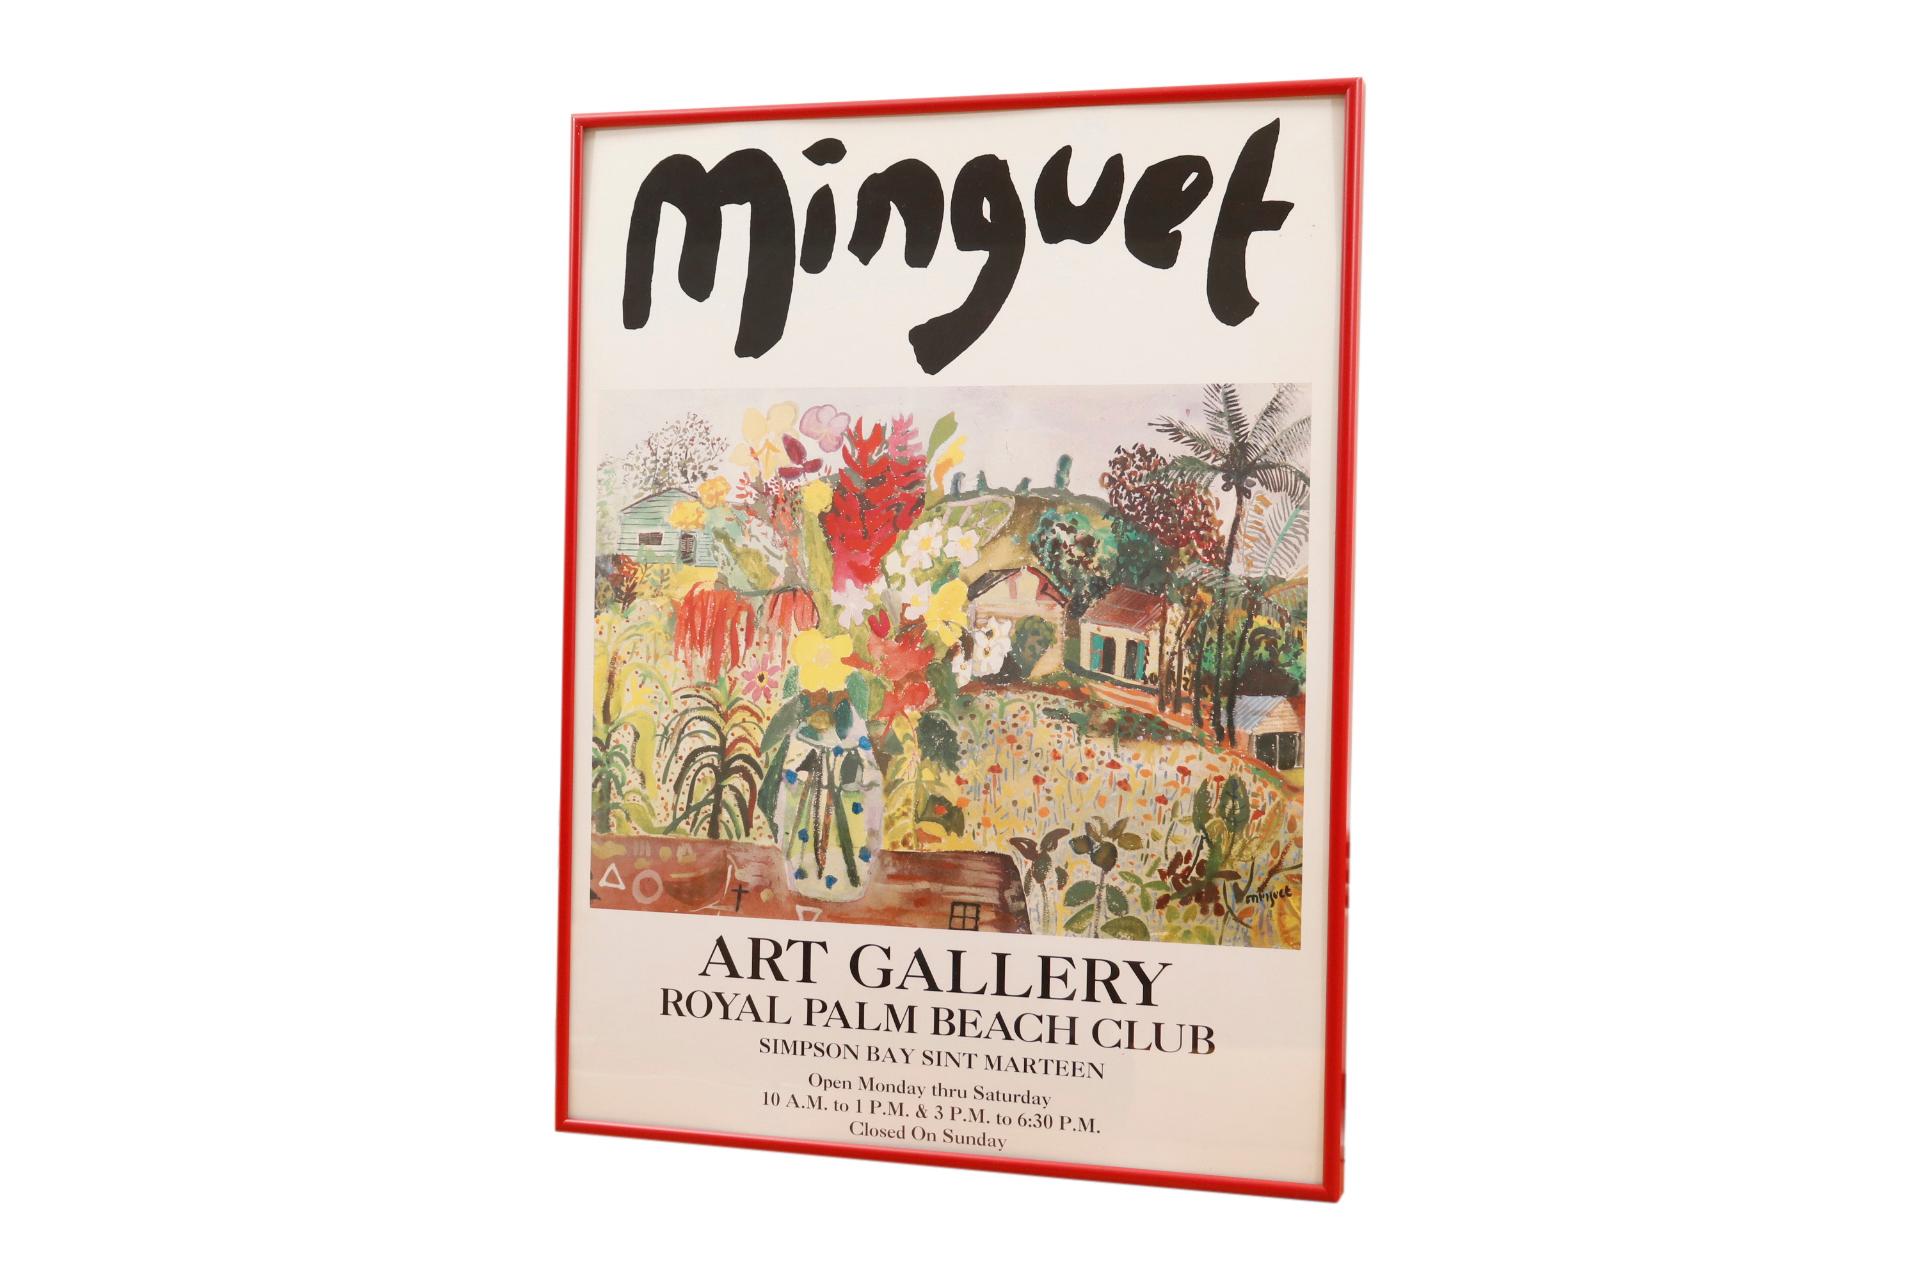 A framed giclee poster promoting an exhibition of works by Minguet at the Royal Palm Beach Club. The artist’s signature is boldly displayed above a window scene in warm tones. Set in a red metal frame and wired and ready to hang.

Alexandre